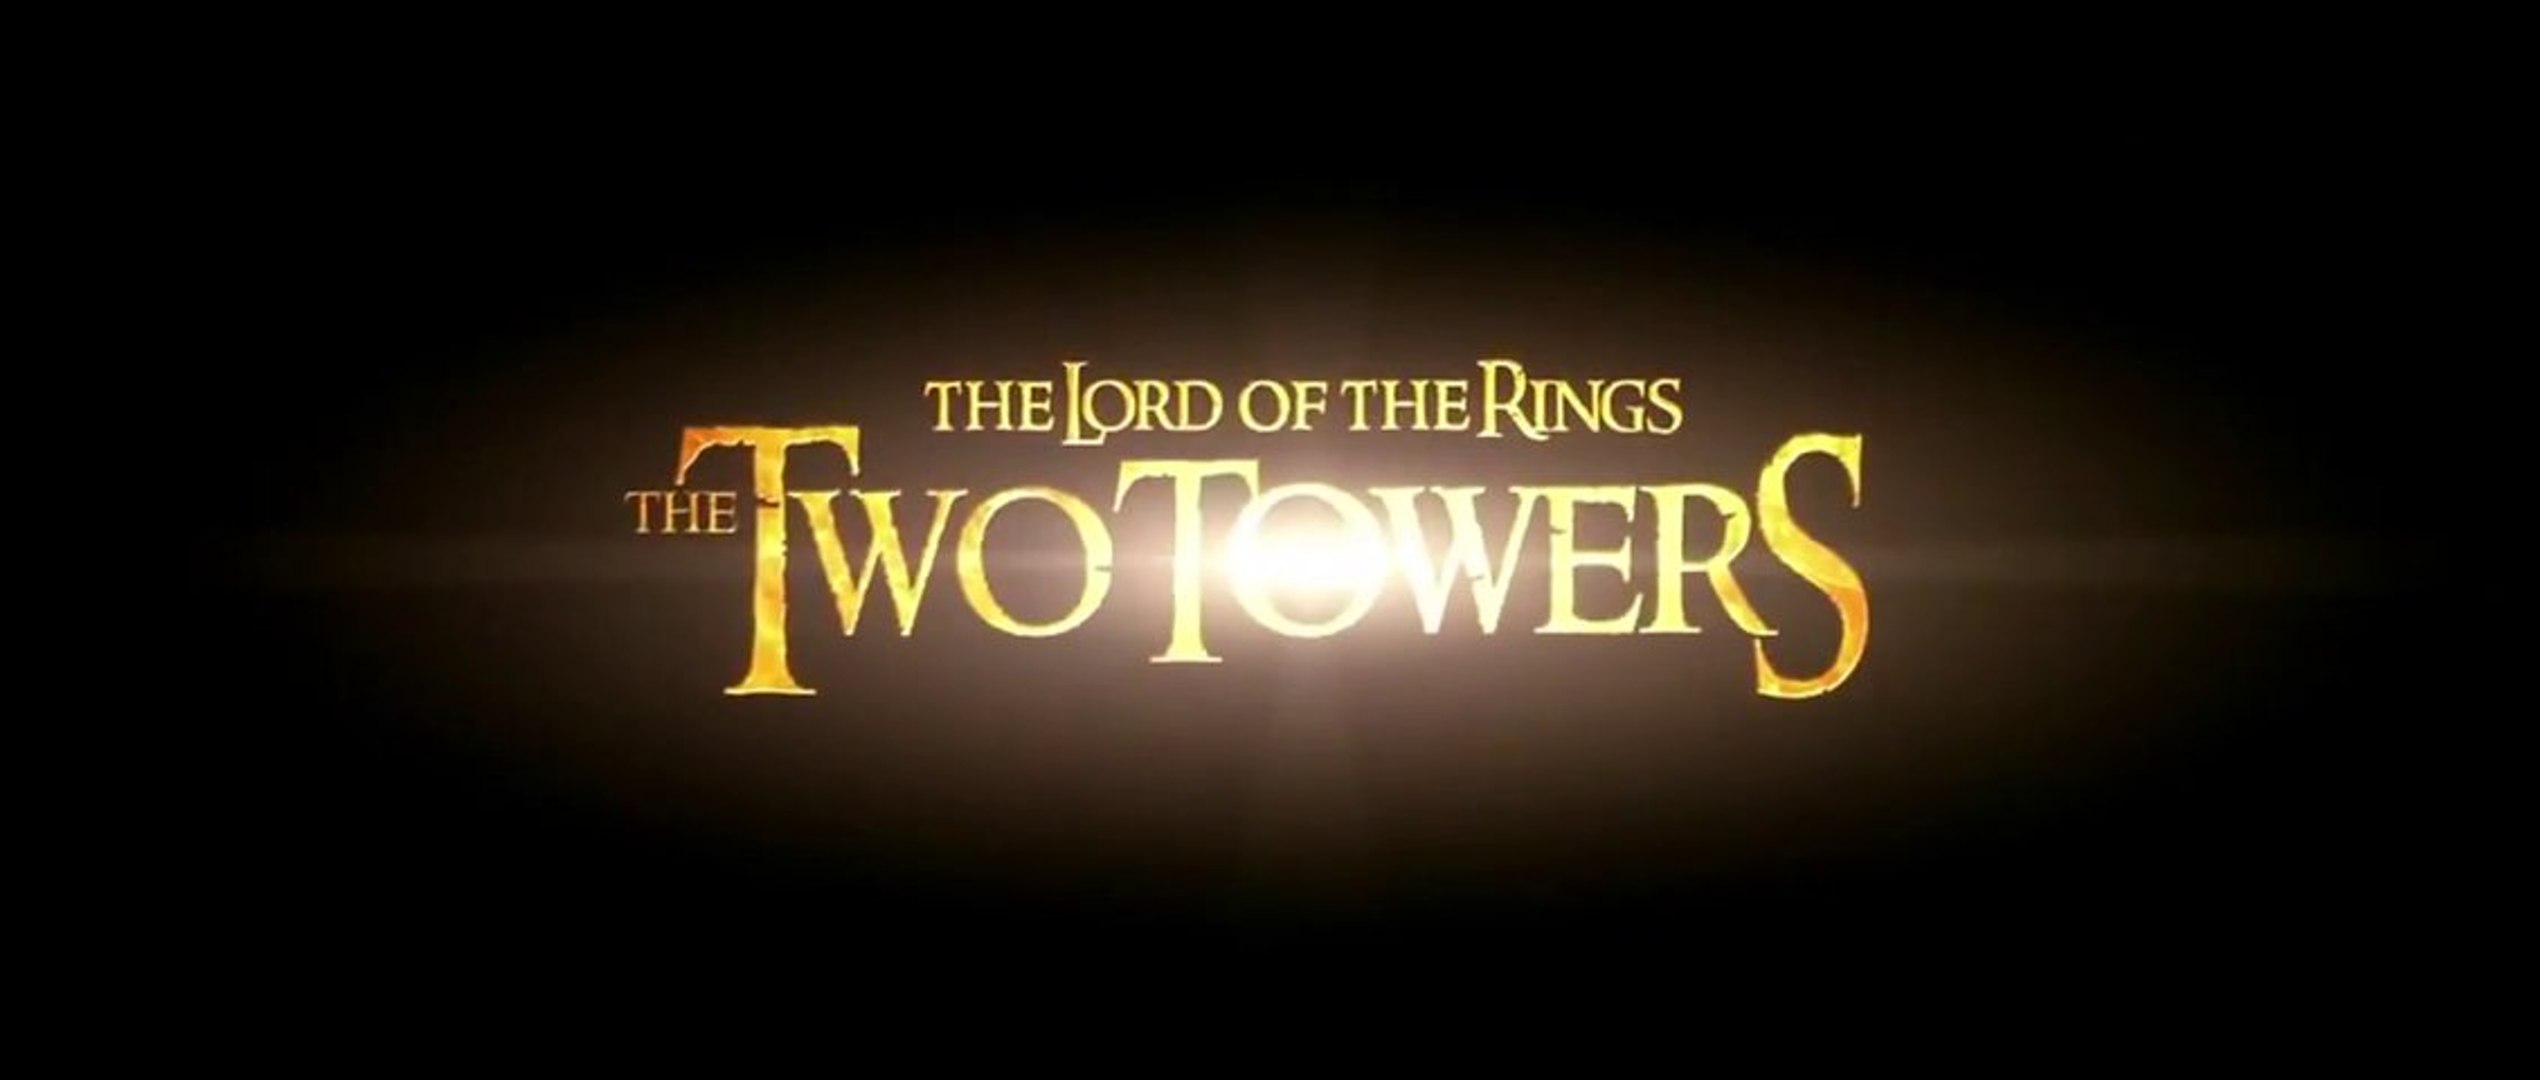 The Lord of the Rings : The Two Towers (2002) - Official Trailer [VO-HD] -  Vidéo Dailymotion